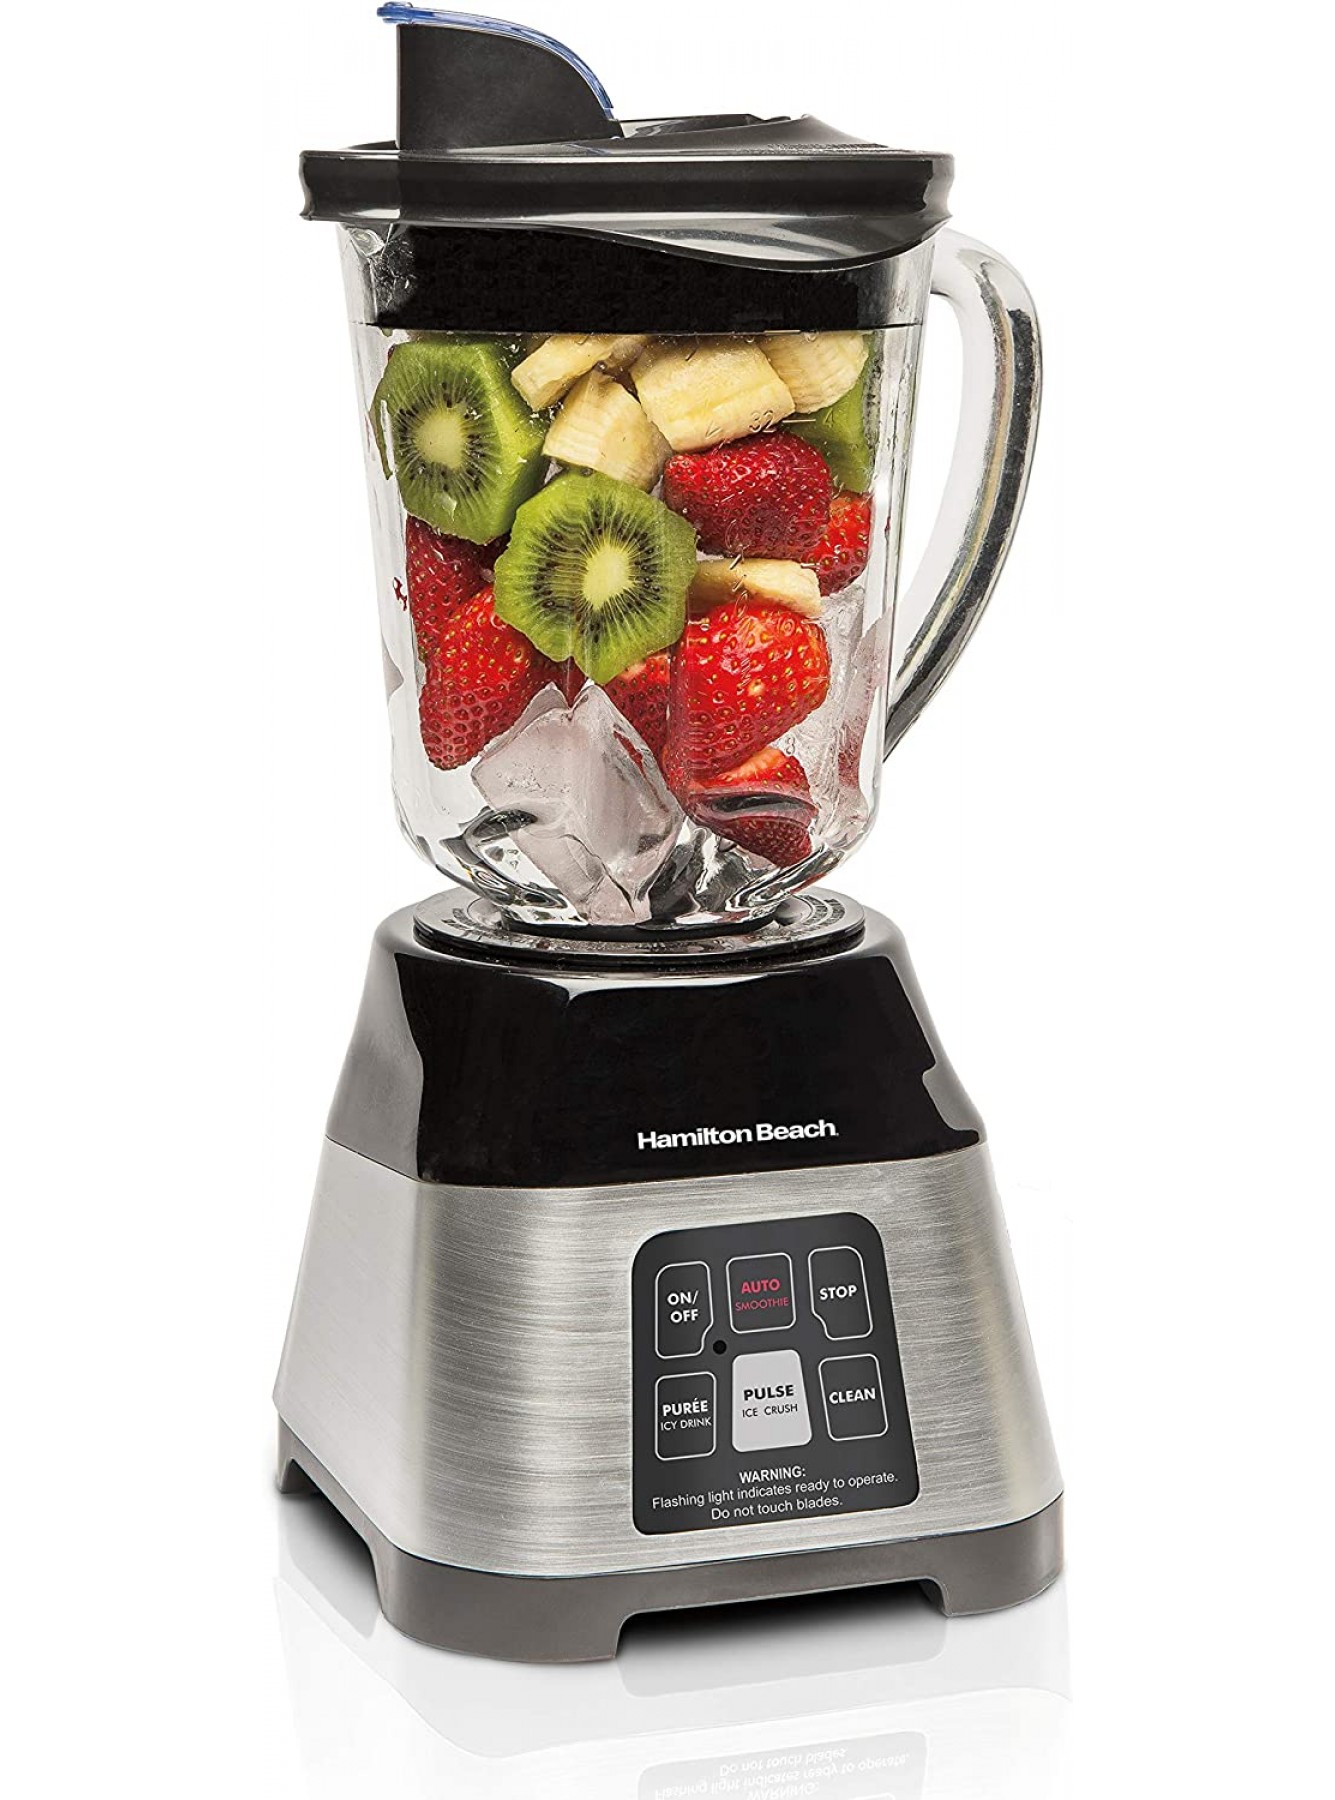 Hamilton Beach Smoothie Smart Blender with 5 Functions Including Auto-Cycle For Shakes & Smoothies 40oz Glass Jar Dial Stainless Steel 56208 B07PXPJ5M8